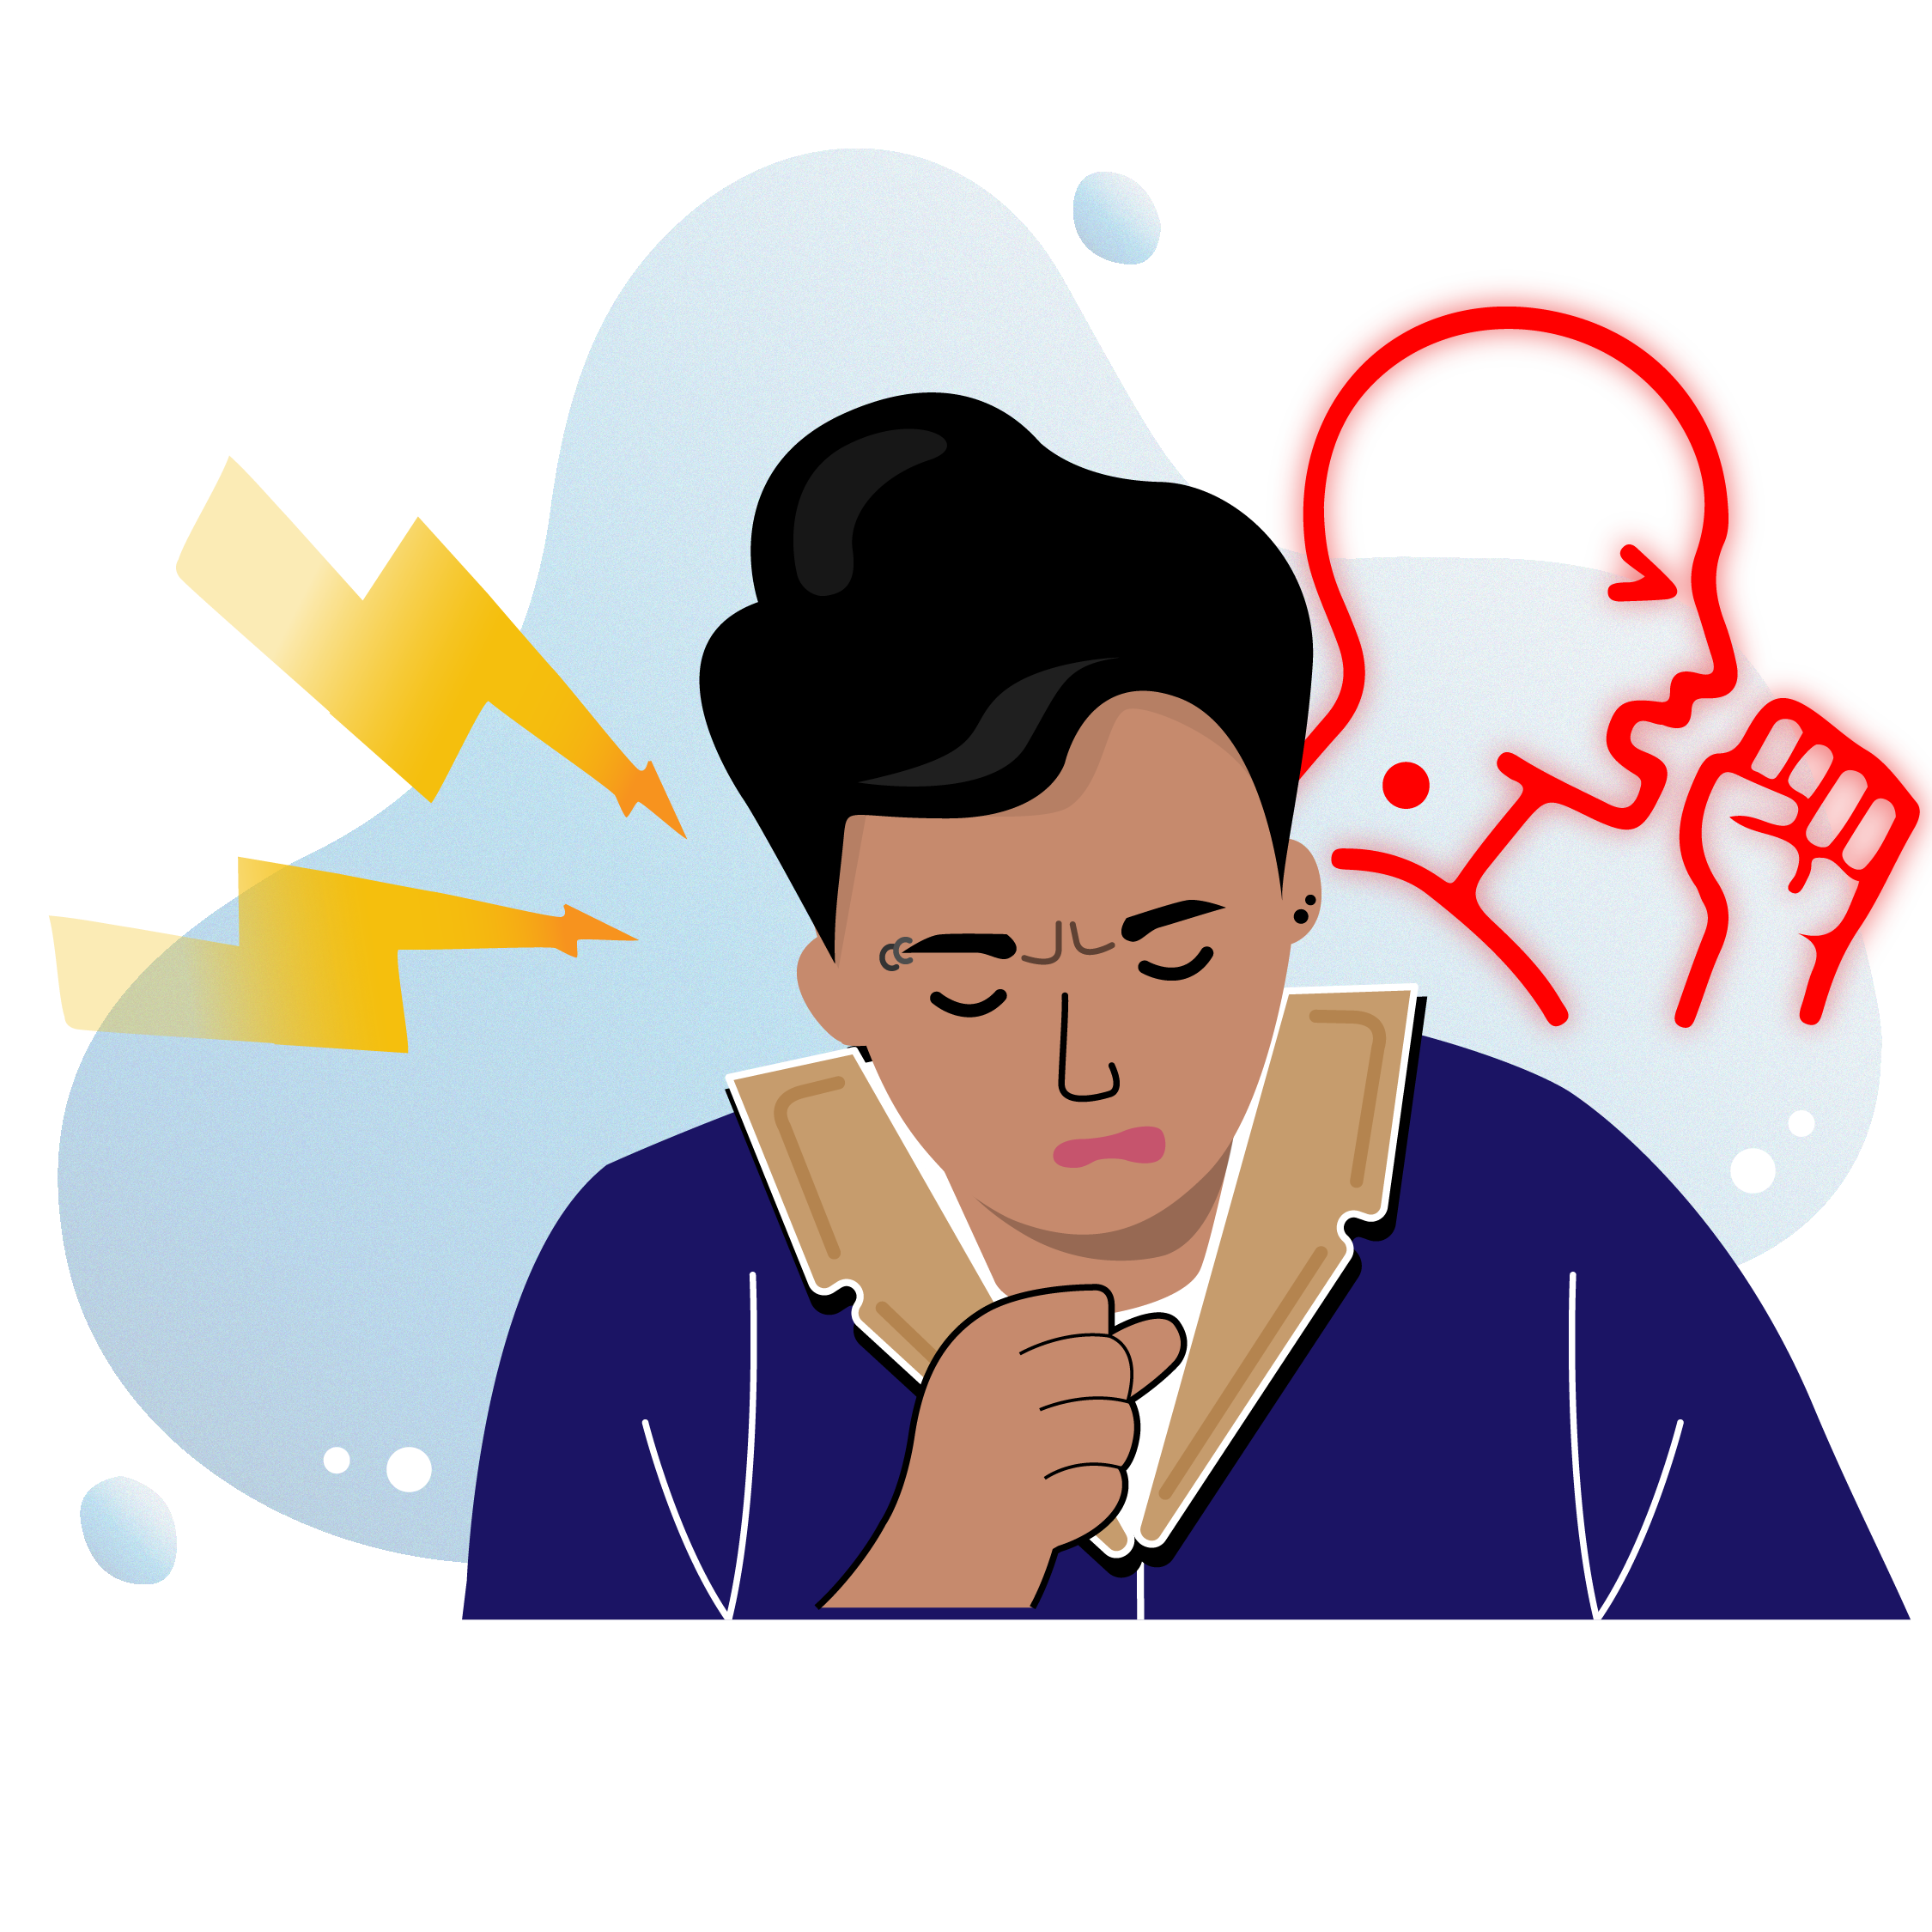 Illustration of someone choking with their fist balled and lightening distress symbols in the background